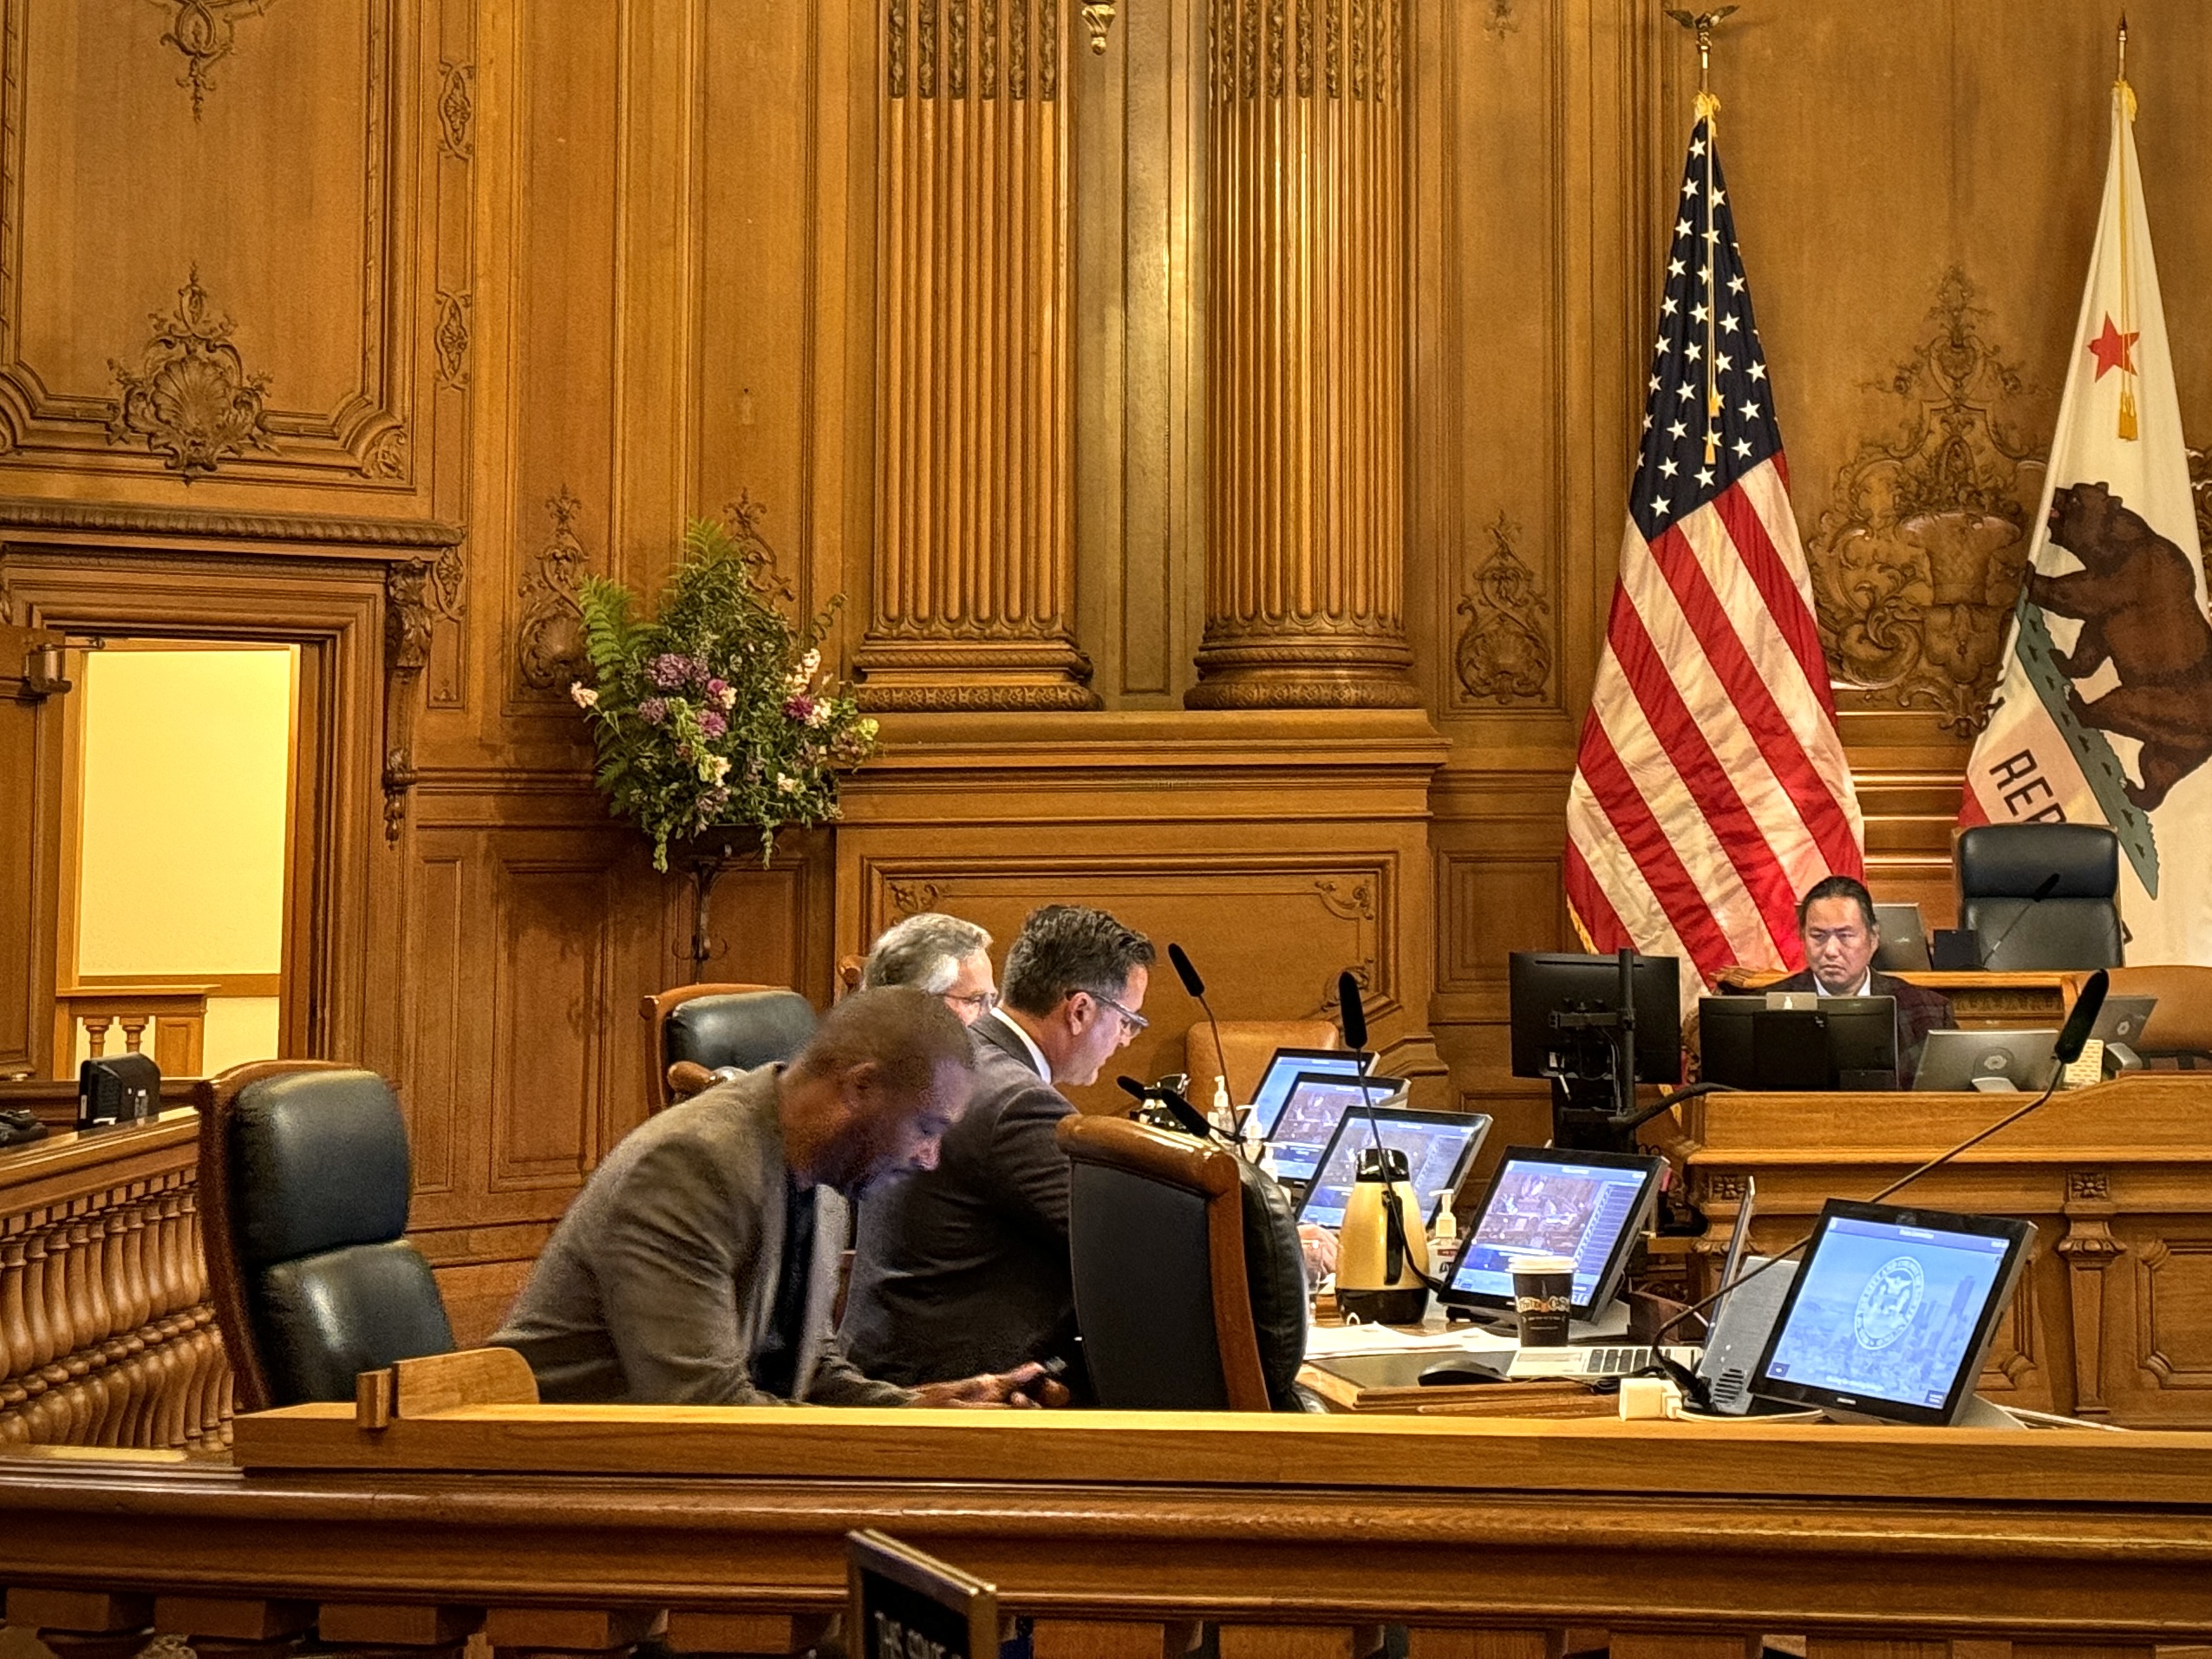 Four individuals sit at a wooden desk with multiple computer monitors in a room with ornate wood paneling, an American flag, and a California state flag.